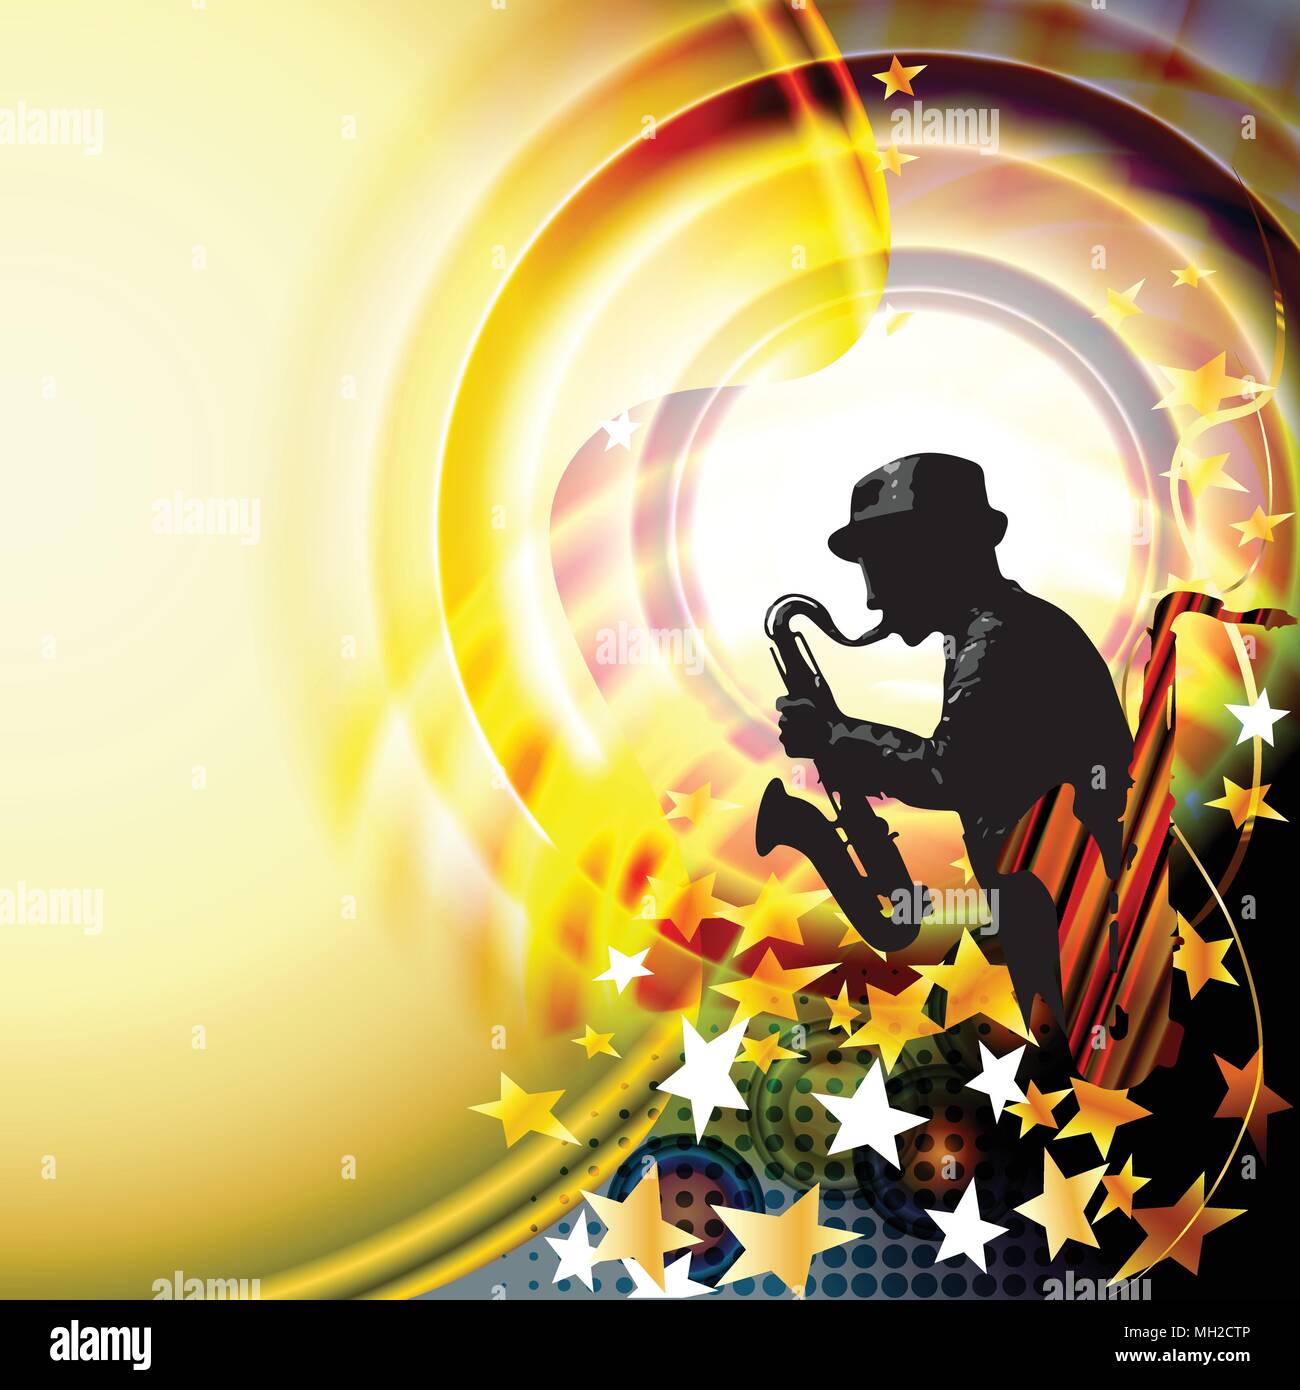 Jazz music festival background with saxophone player Stock Vector